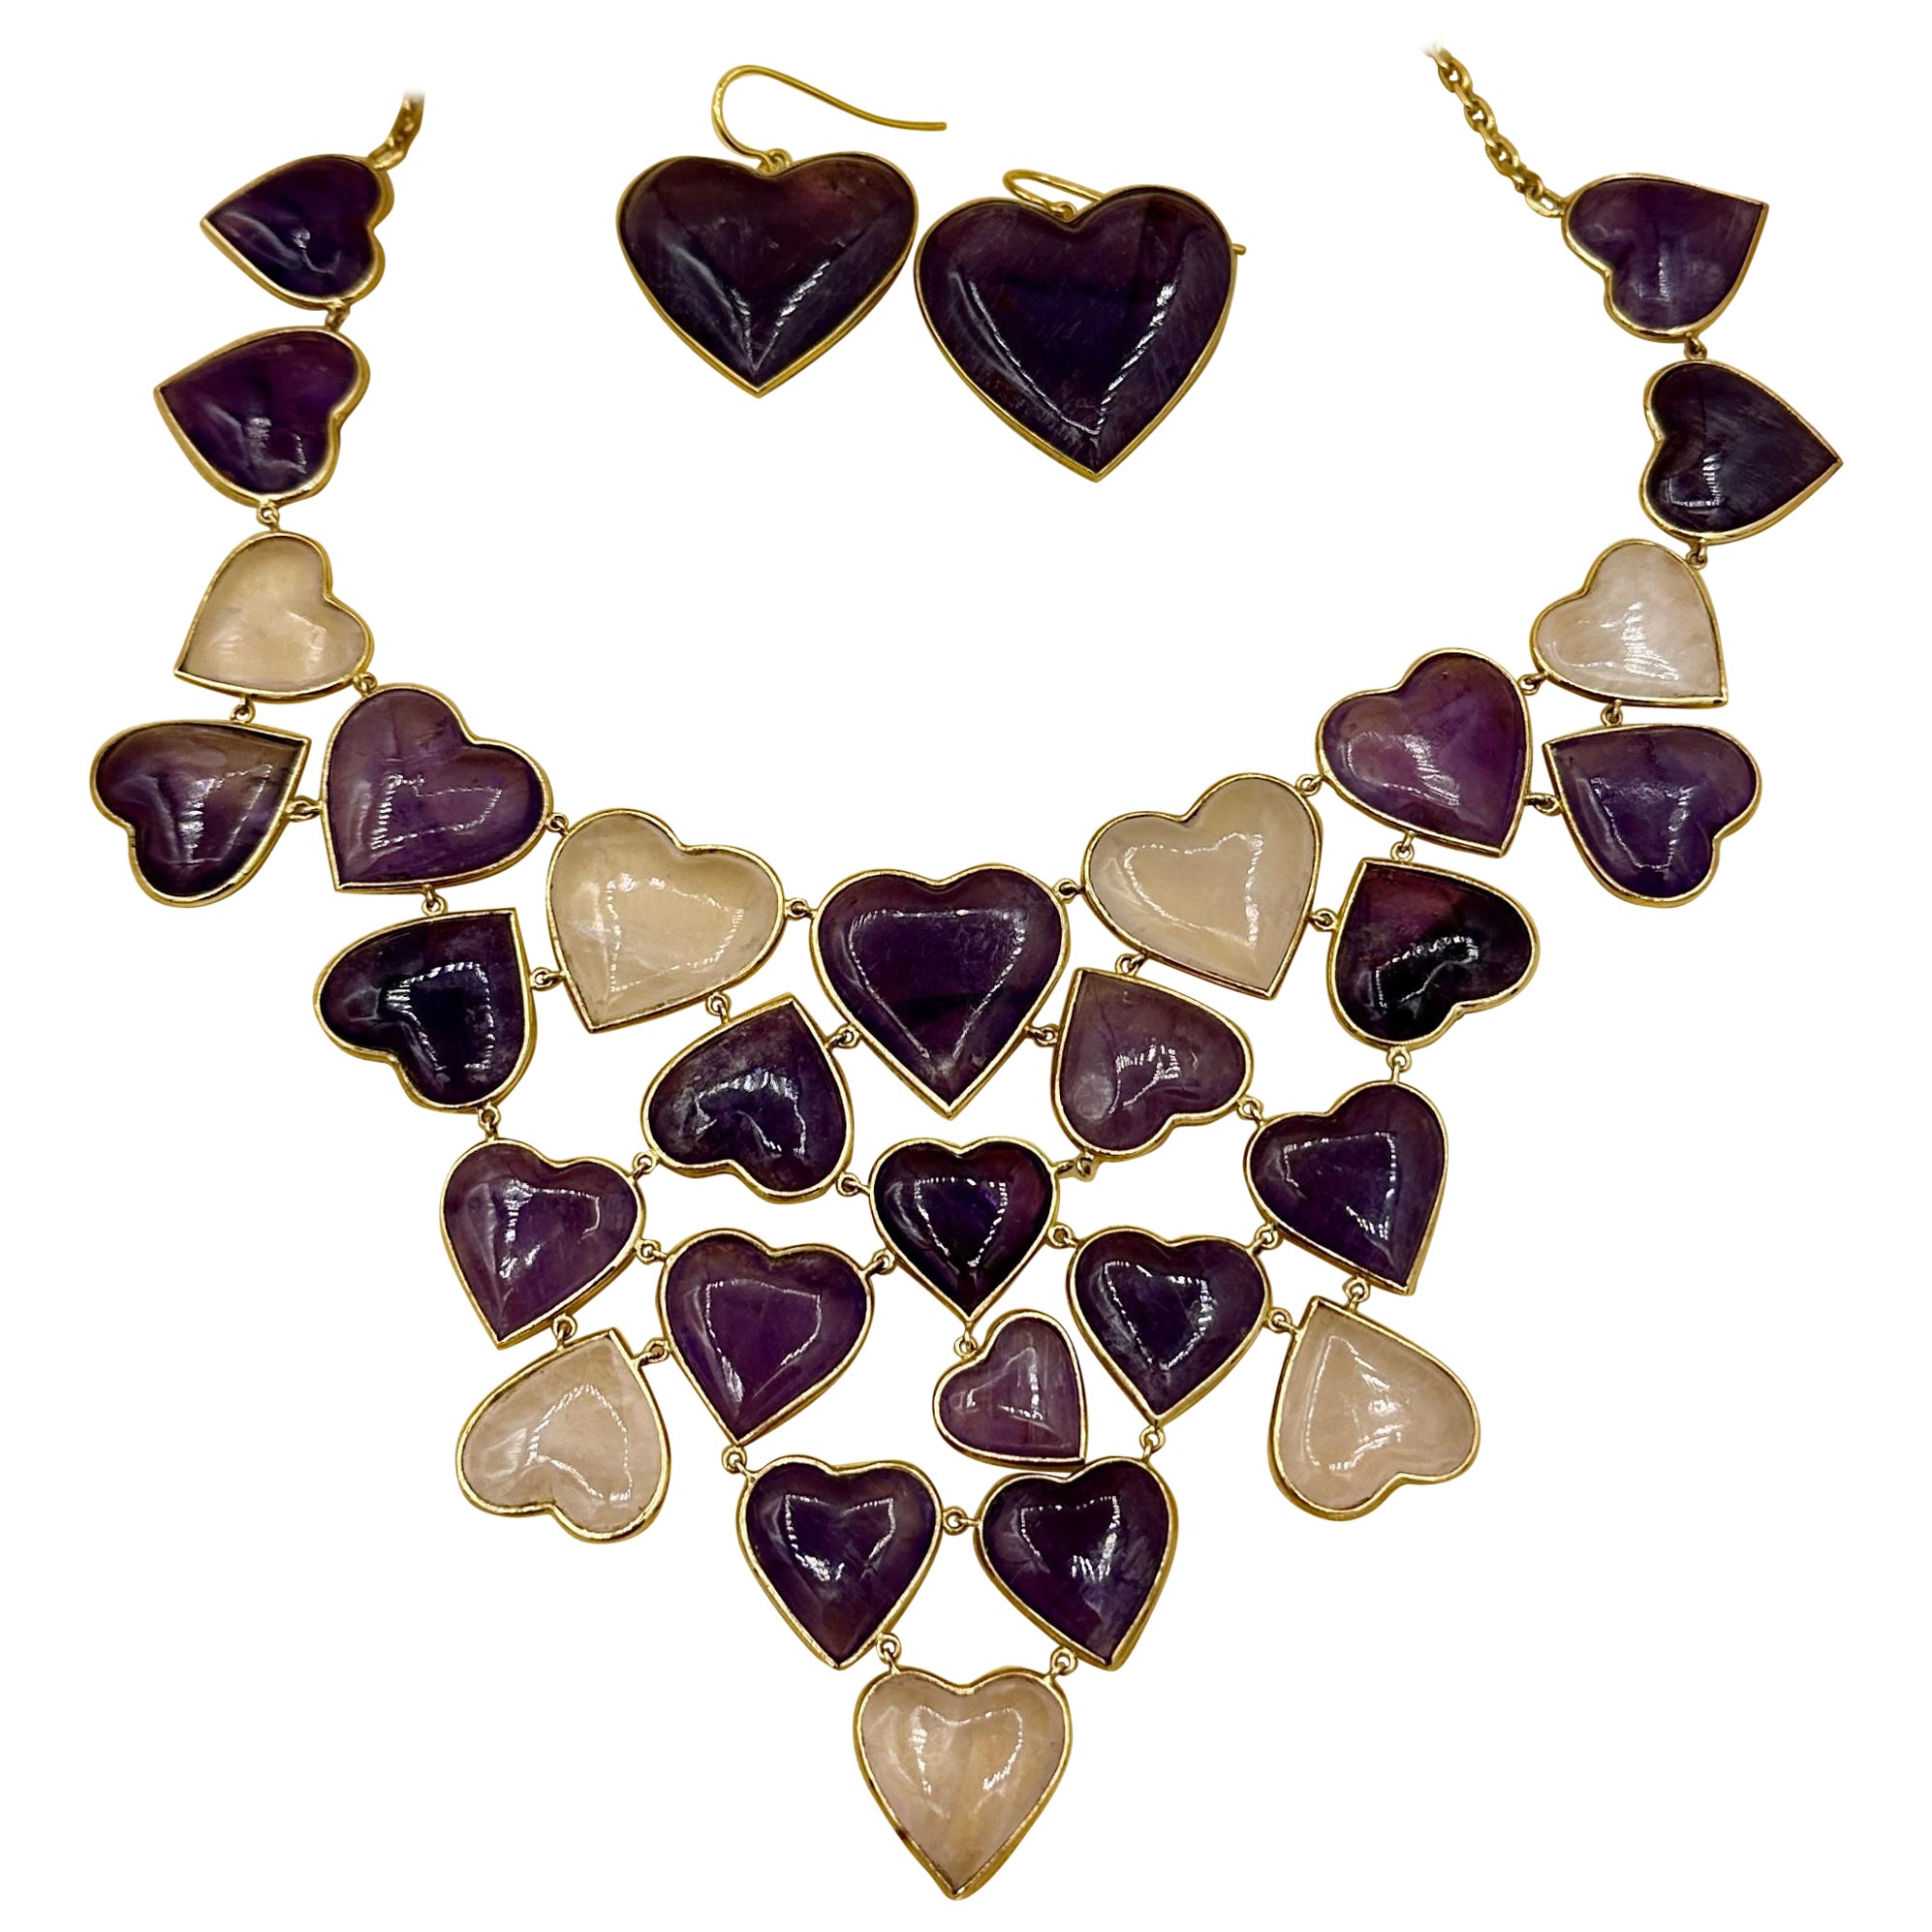 Amethyst Rose Quartz Heart Necklace and Earrings 14 Karat Gold Ms. Daves Estate For Sale